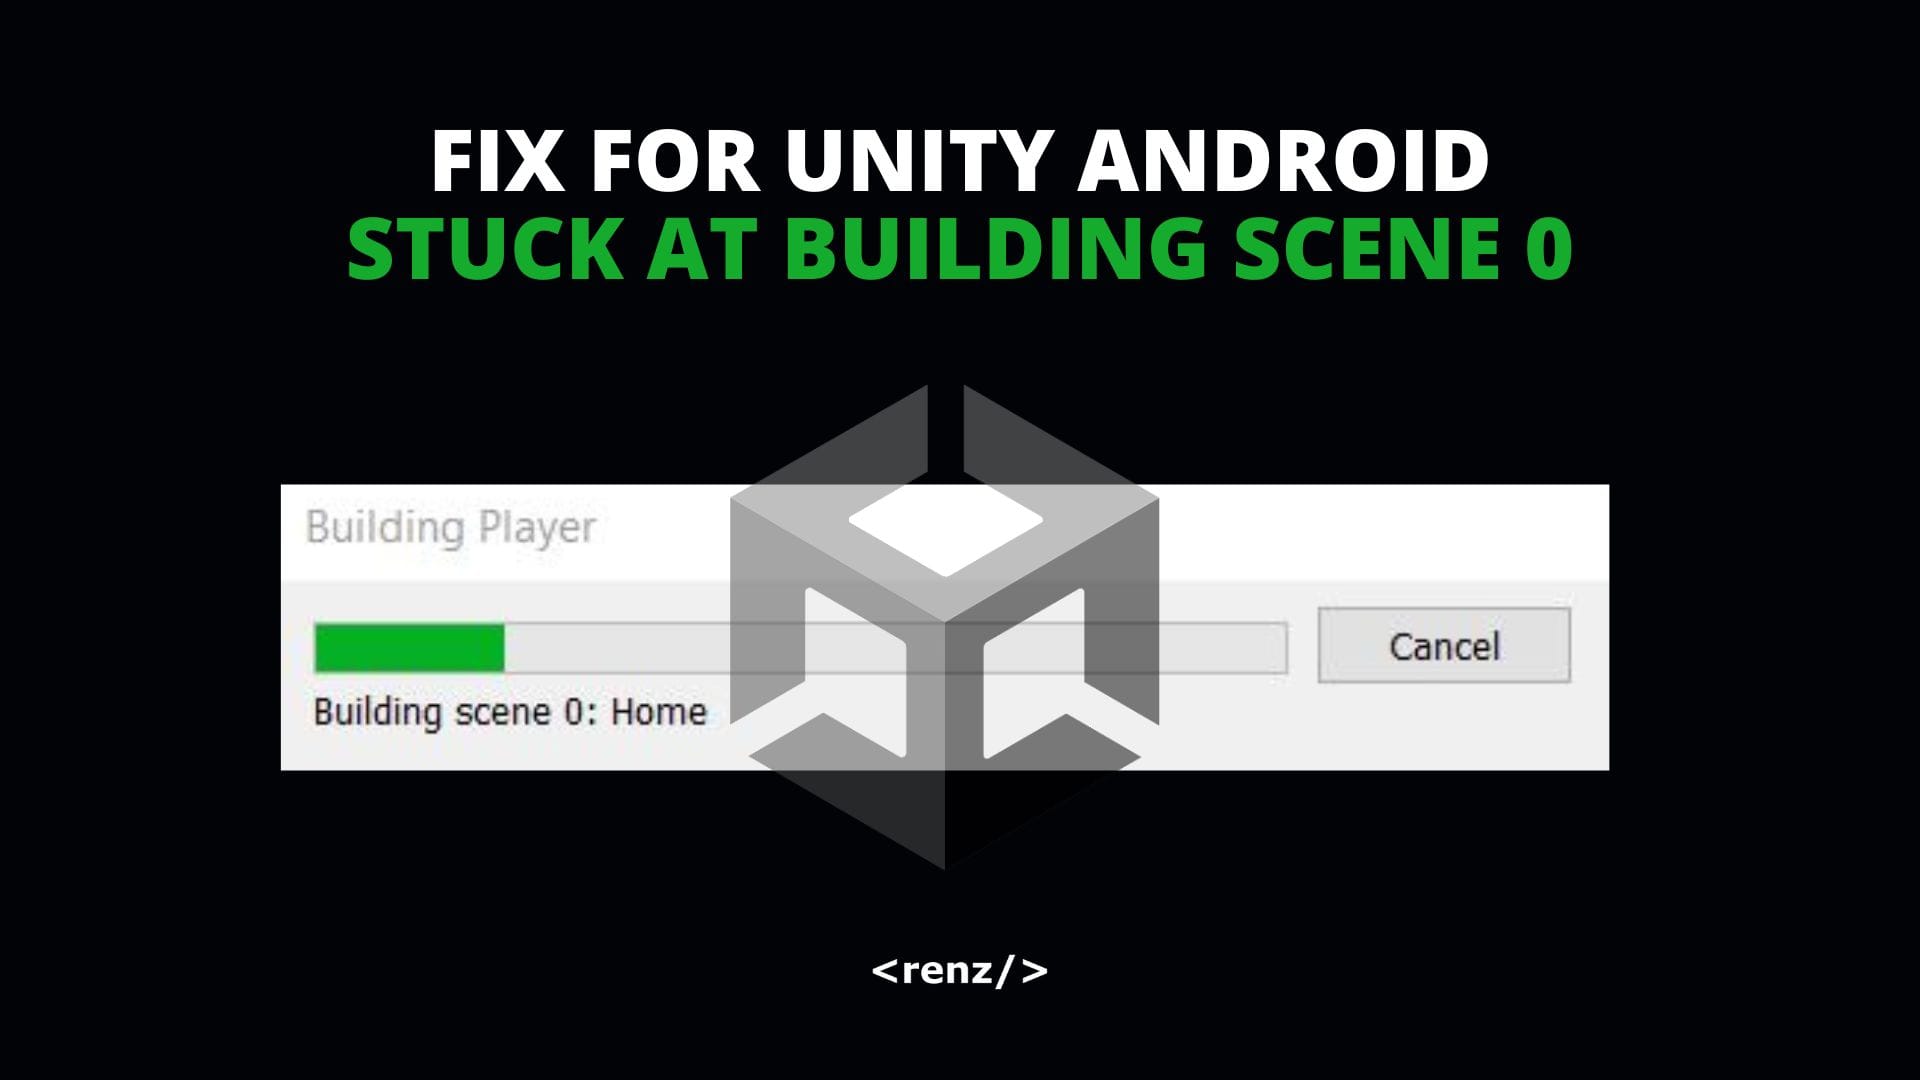 Fix for Unity Android Stuck at Building Scene 0